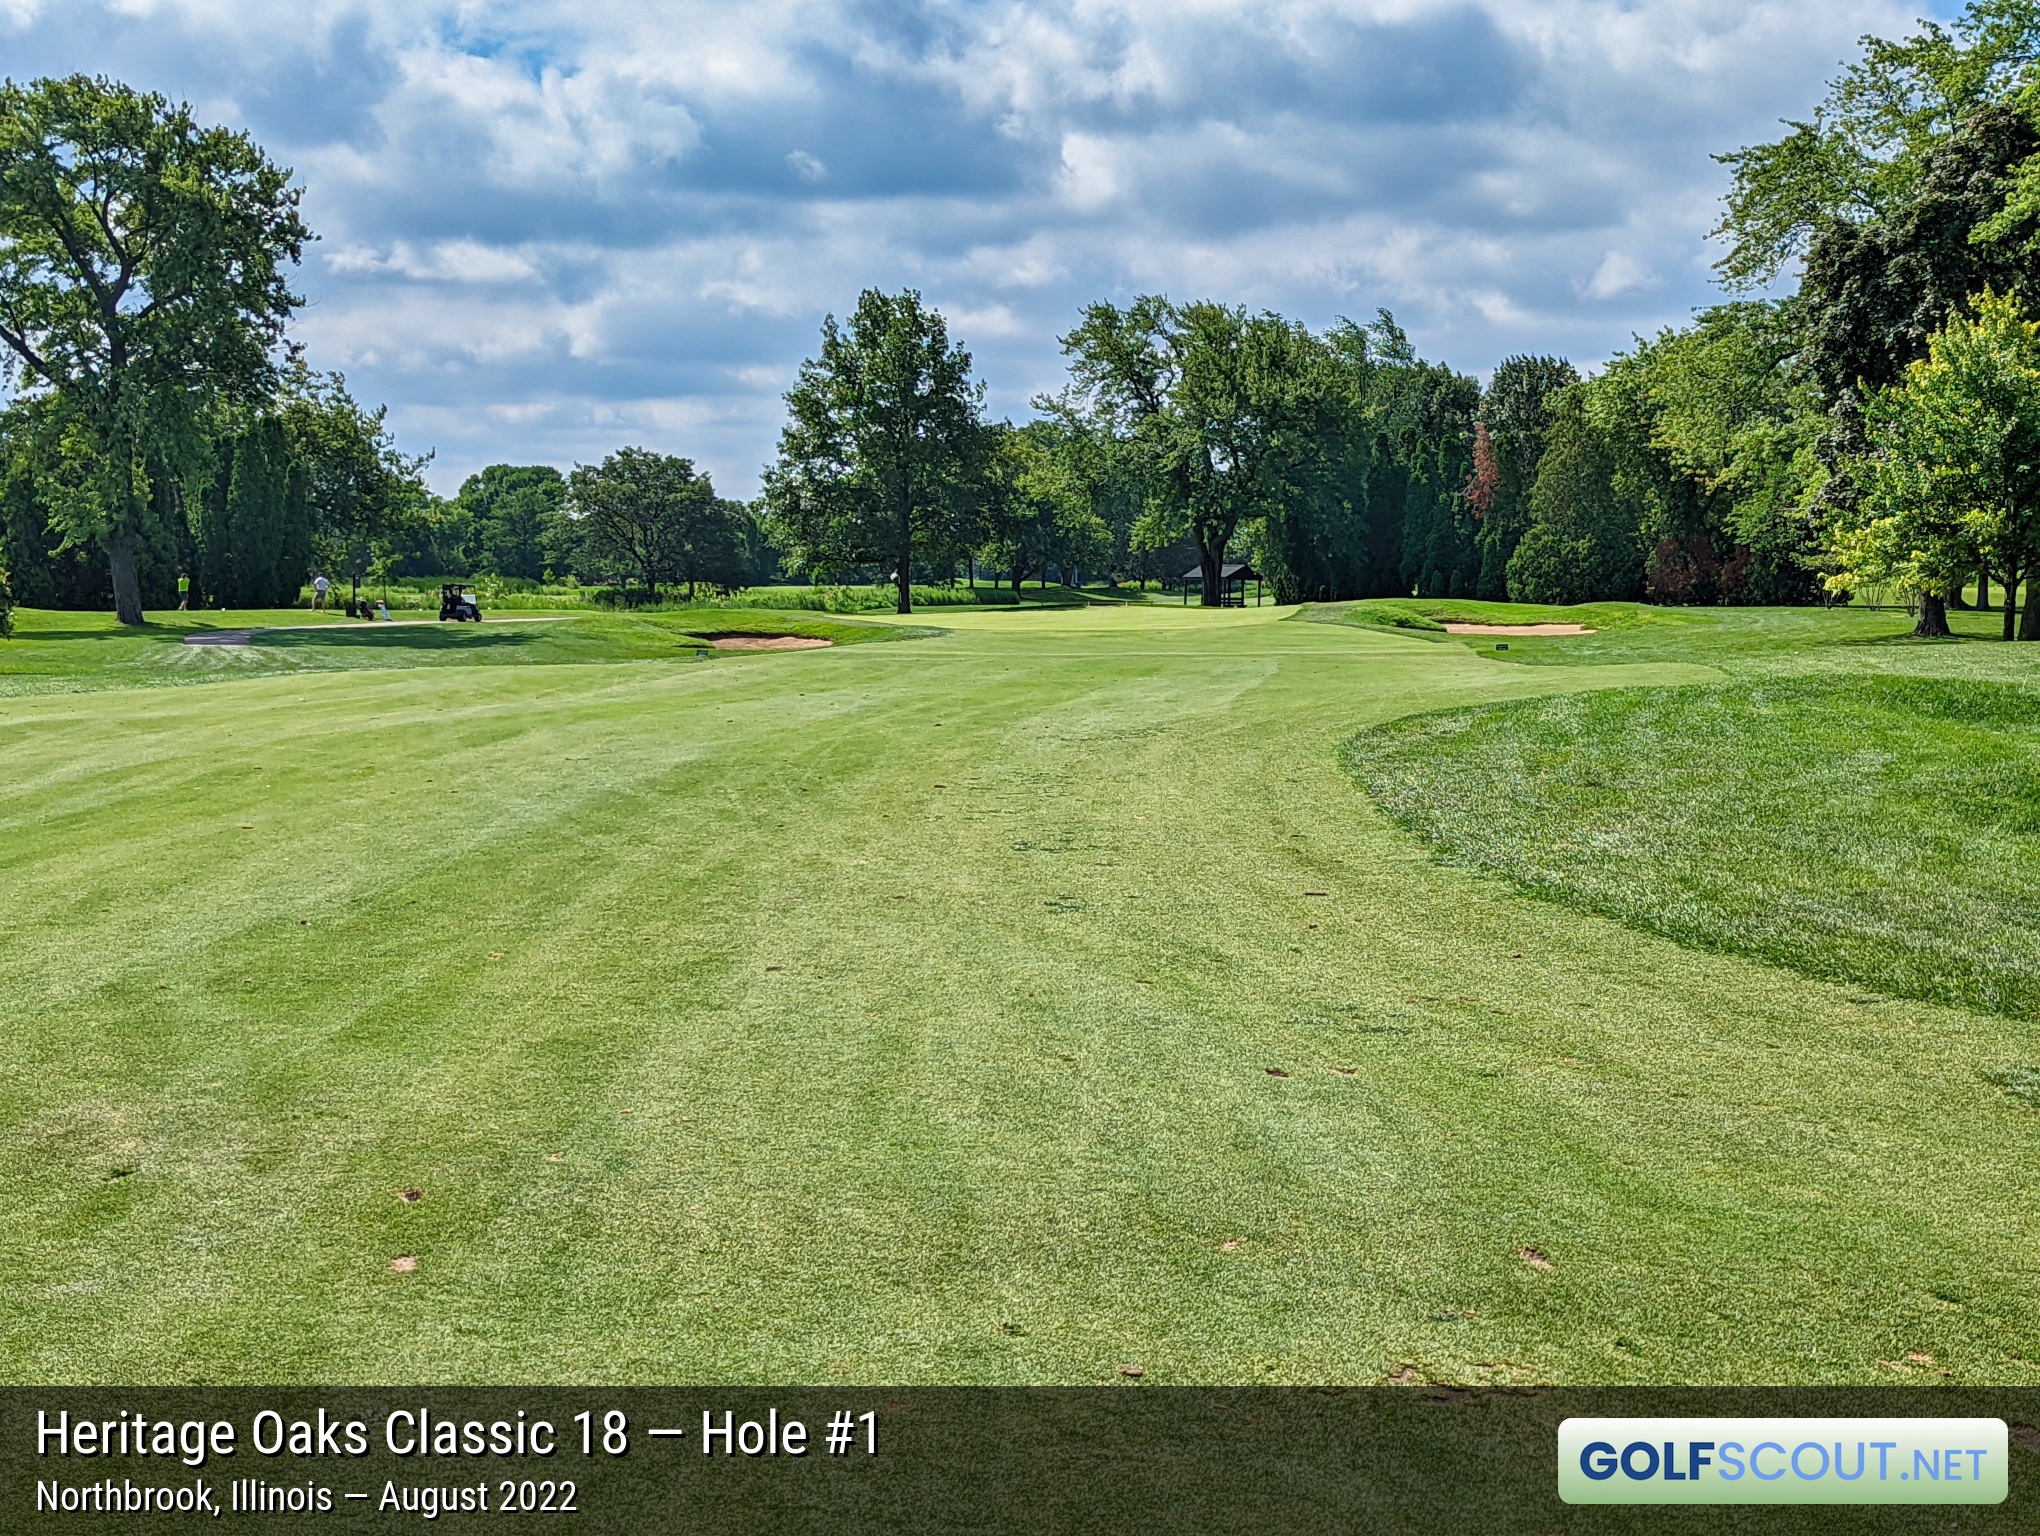 Photo of hole #1 at Heritage Oaks Golf Club - Classic 18 in Northbrook, Illinois. 